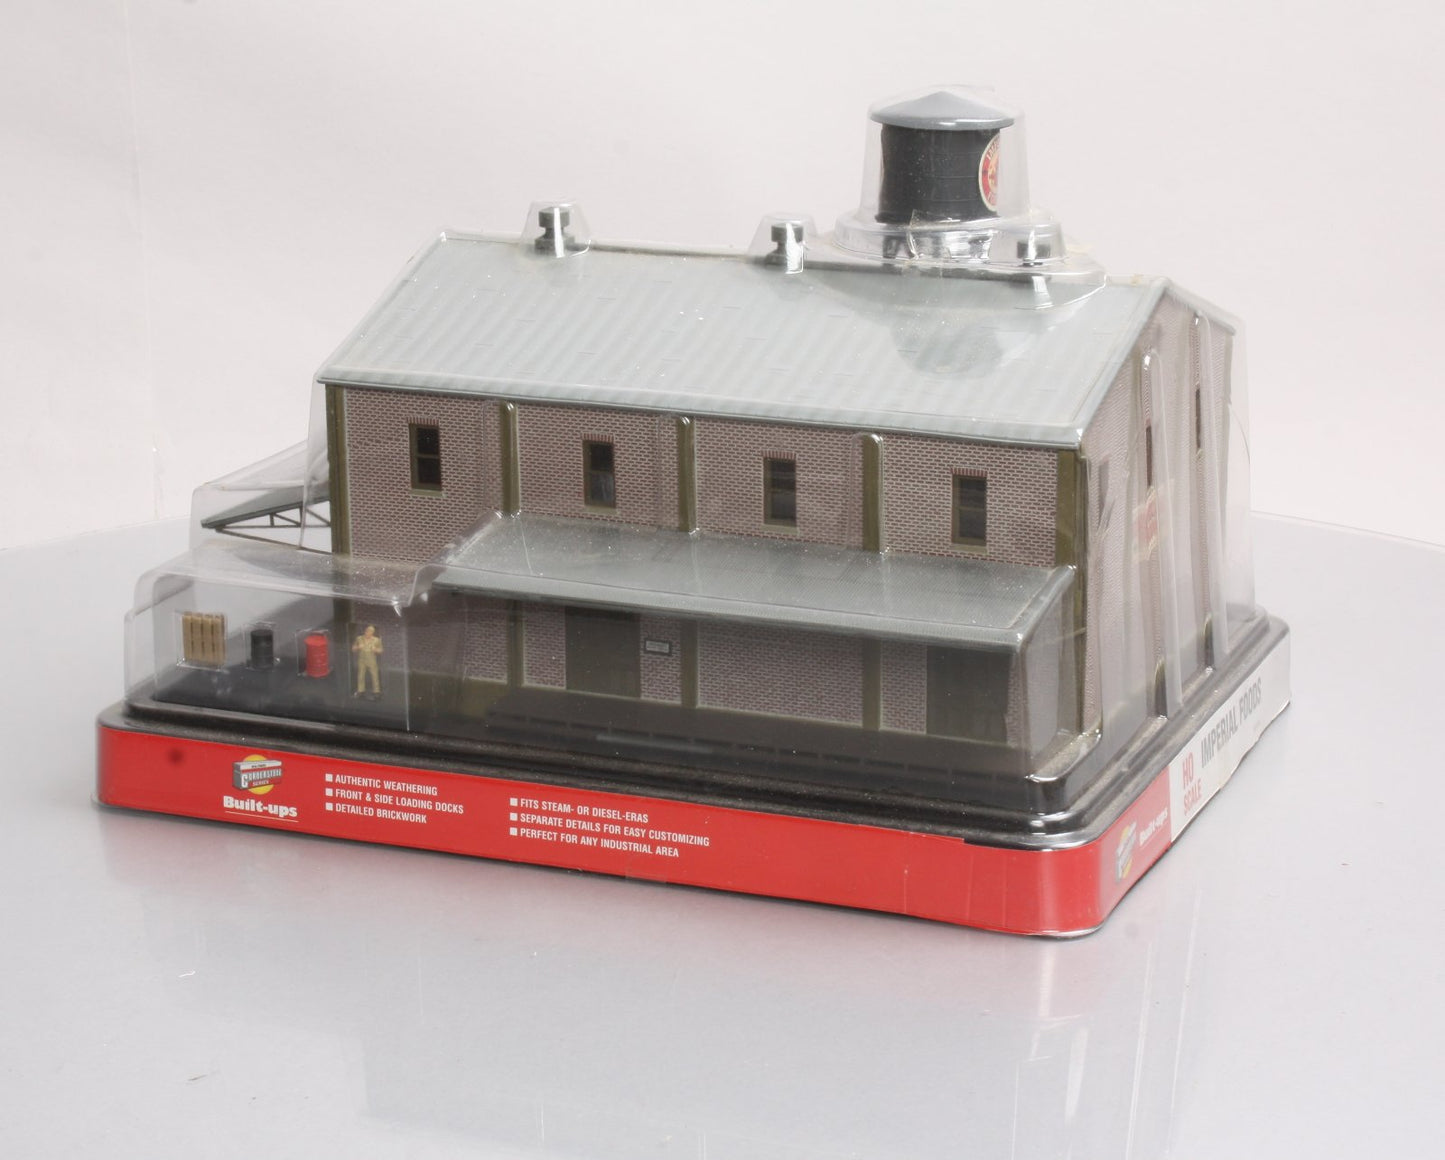 Walthers 2852 HO Scale Built-Up Imperial Foods